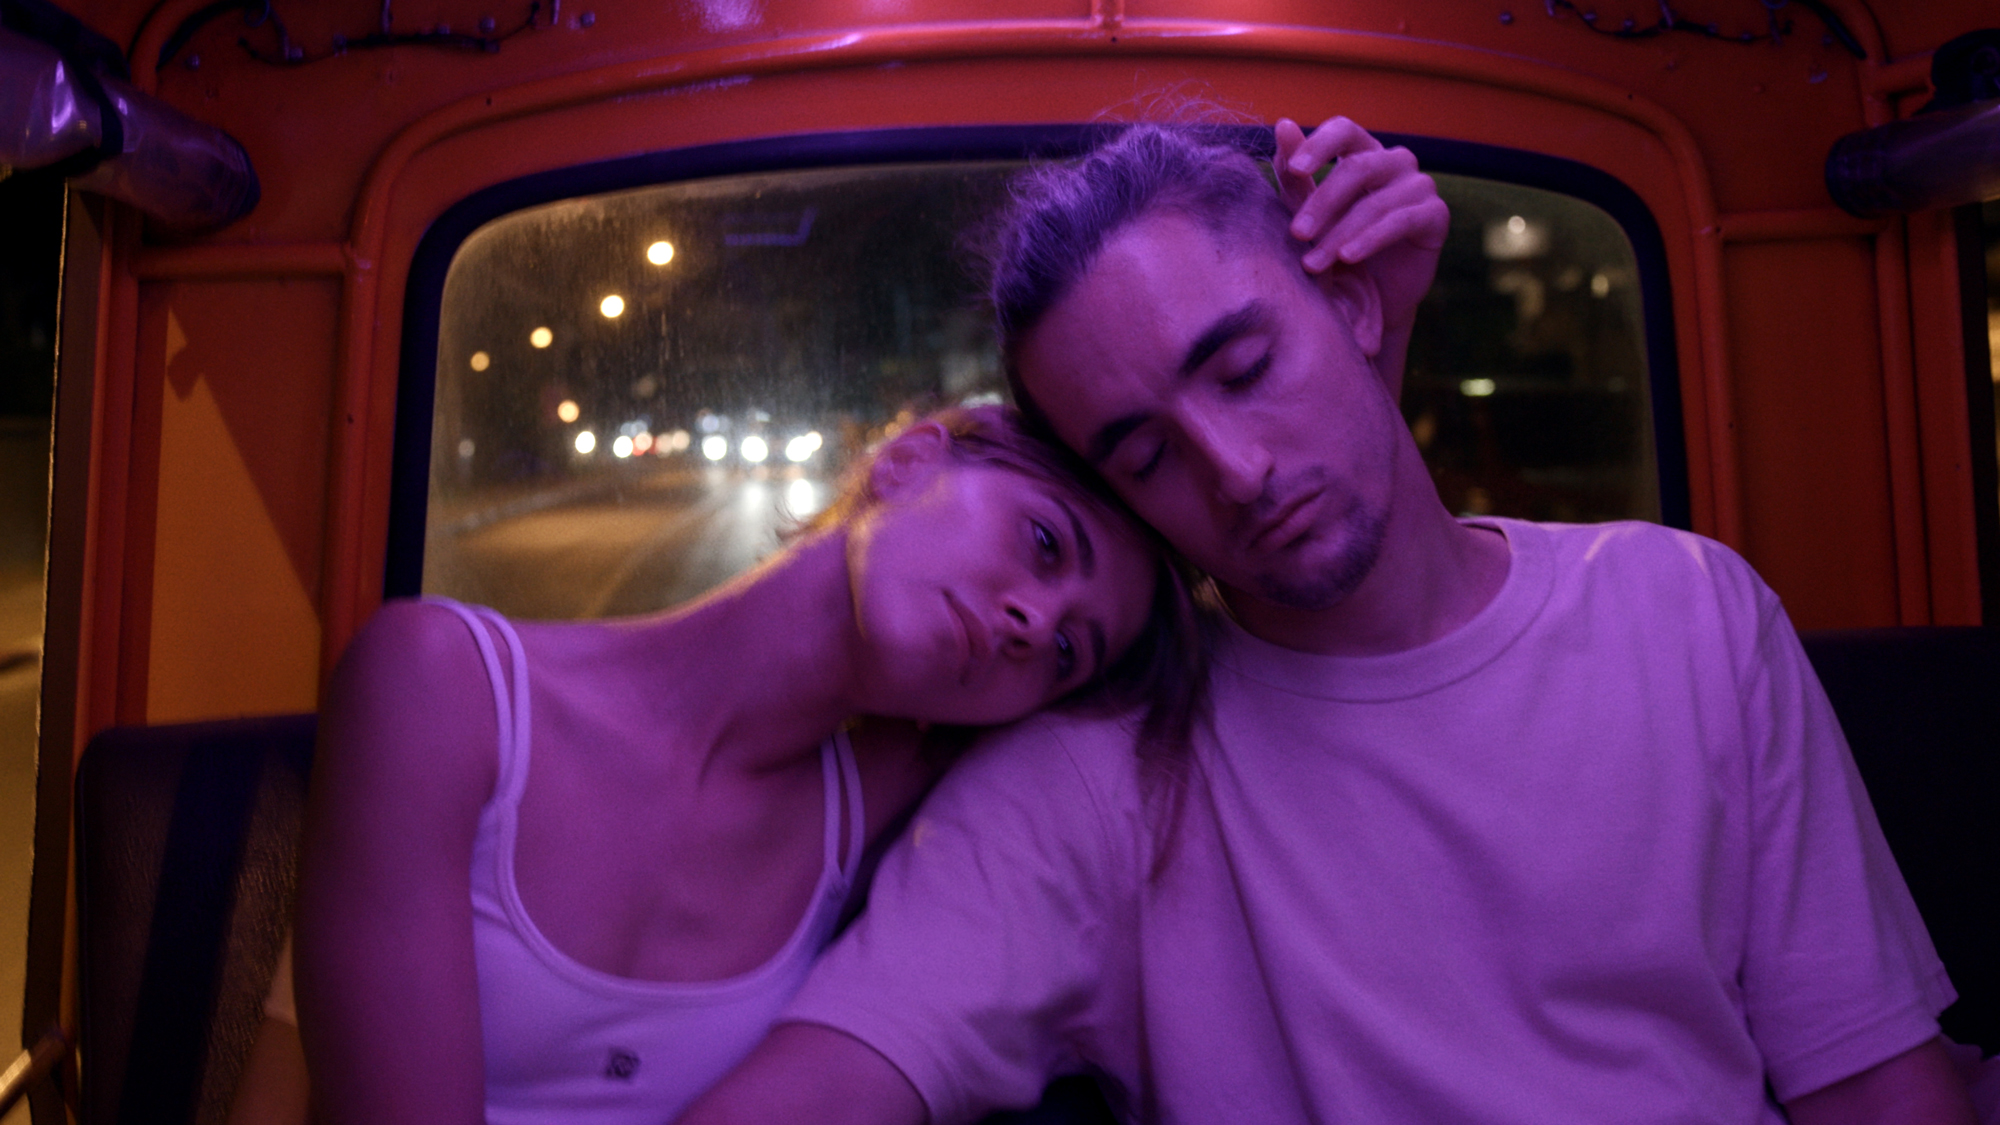 Two people lean on each other in back seat of car under purple light